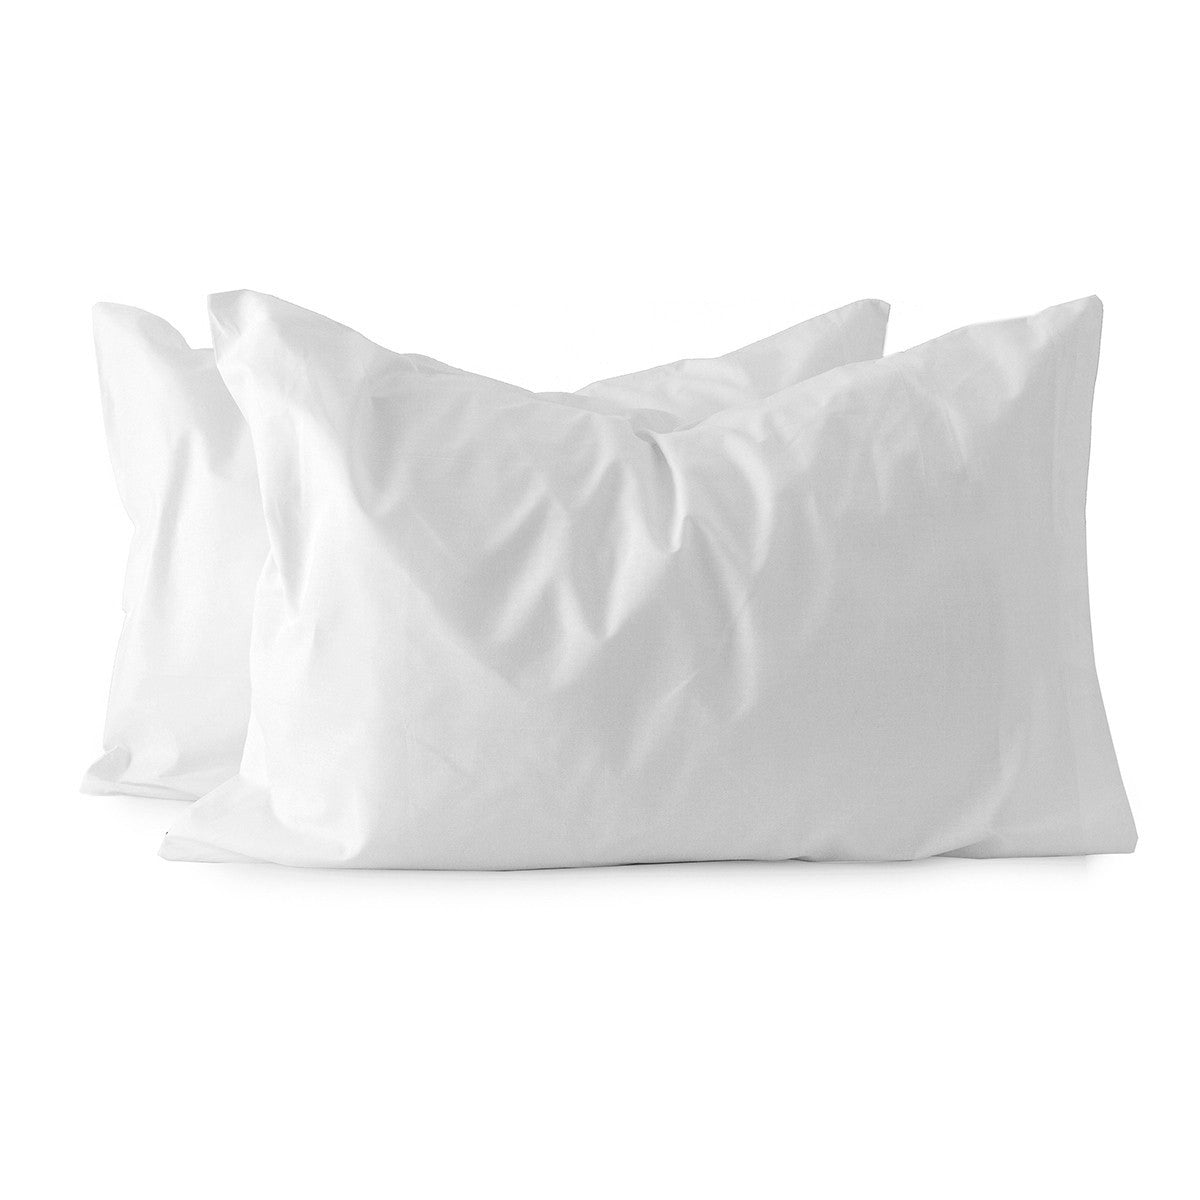 Pair of Fancy Home Iride Pure White Cotton Pillowcases for Hotels and B&amp;Bs